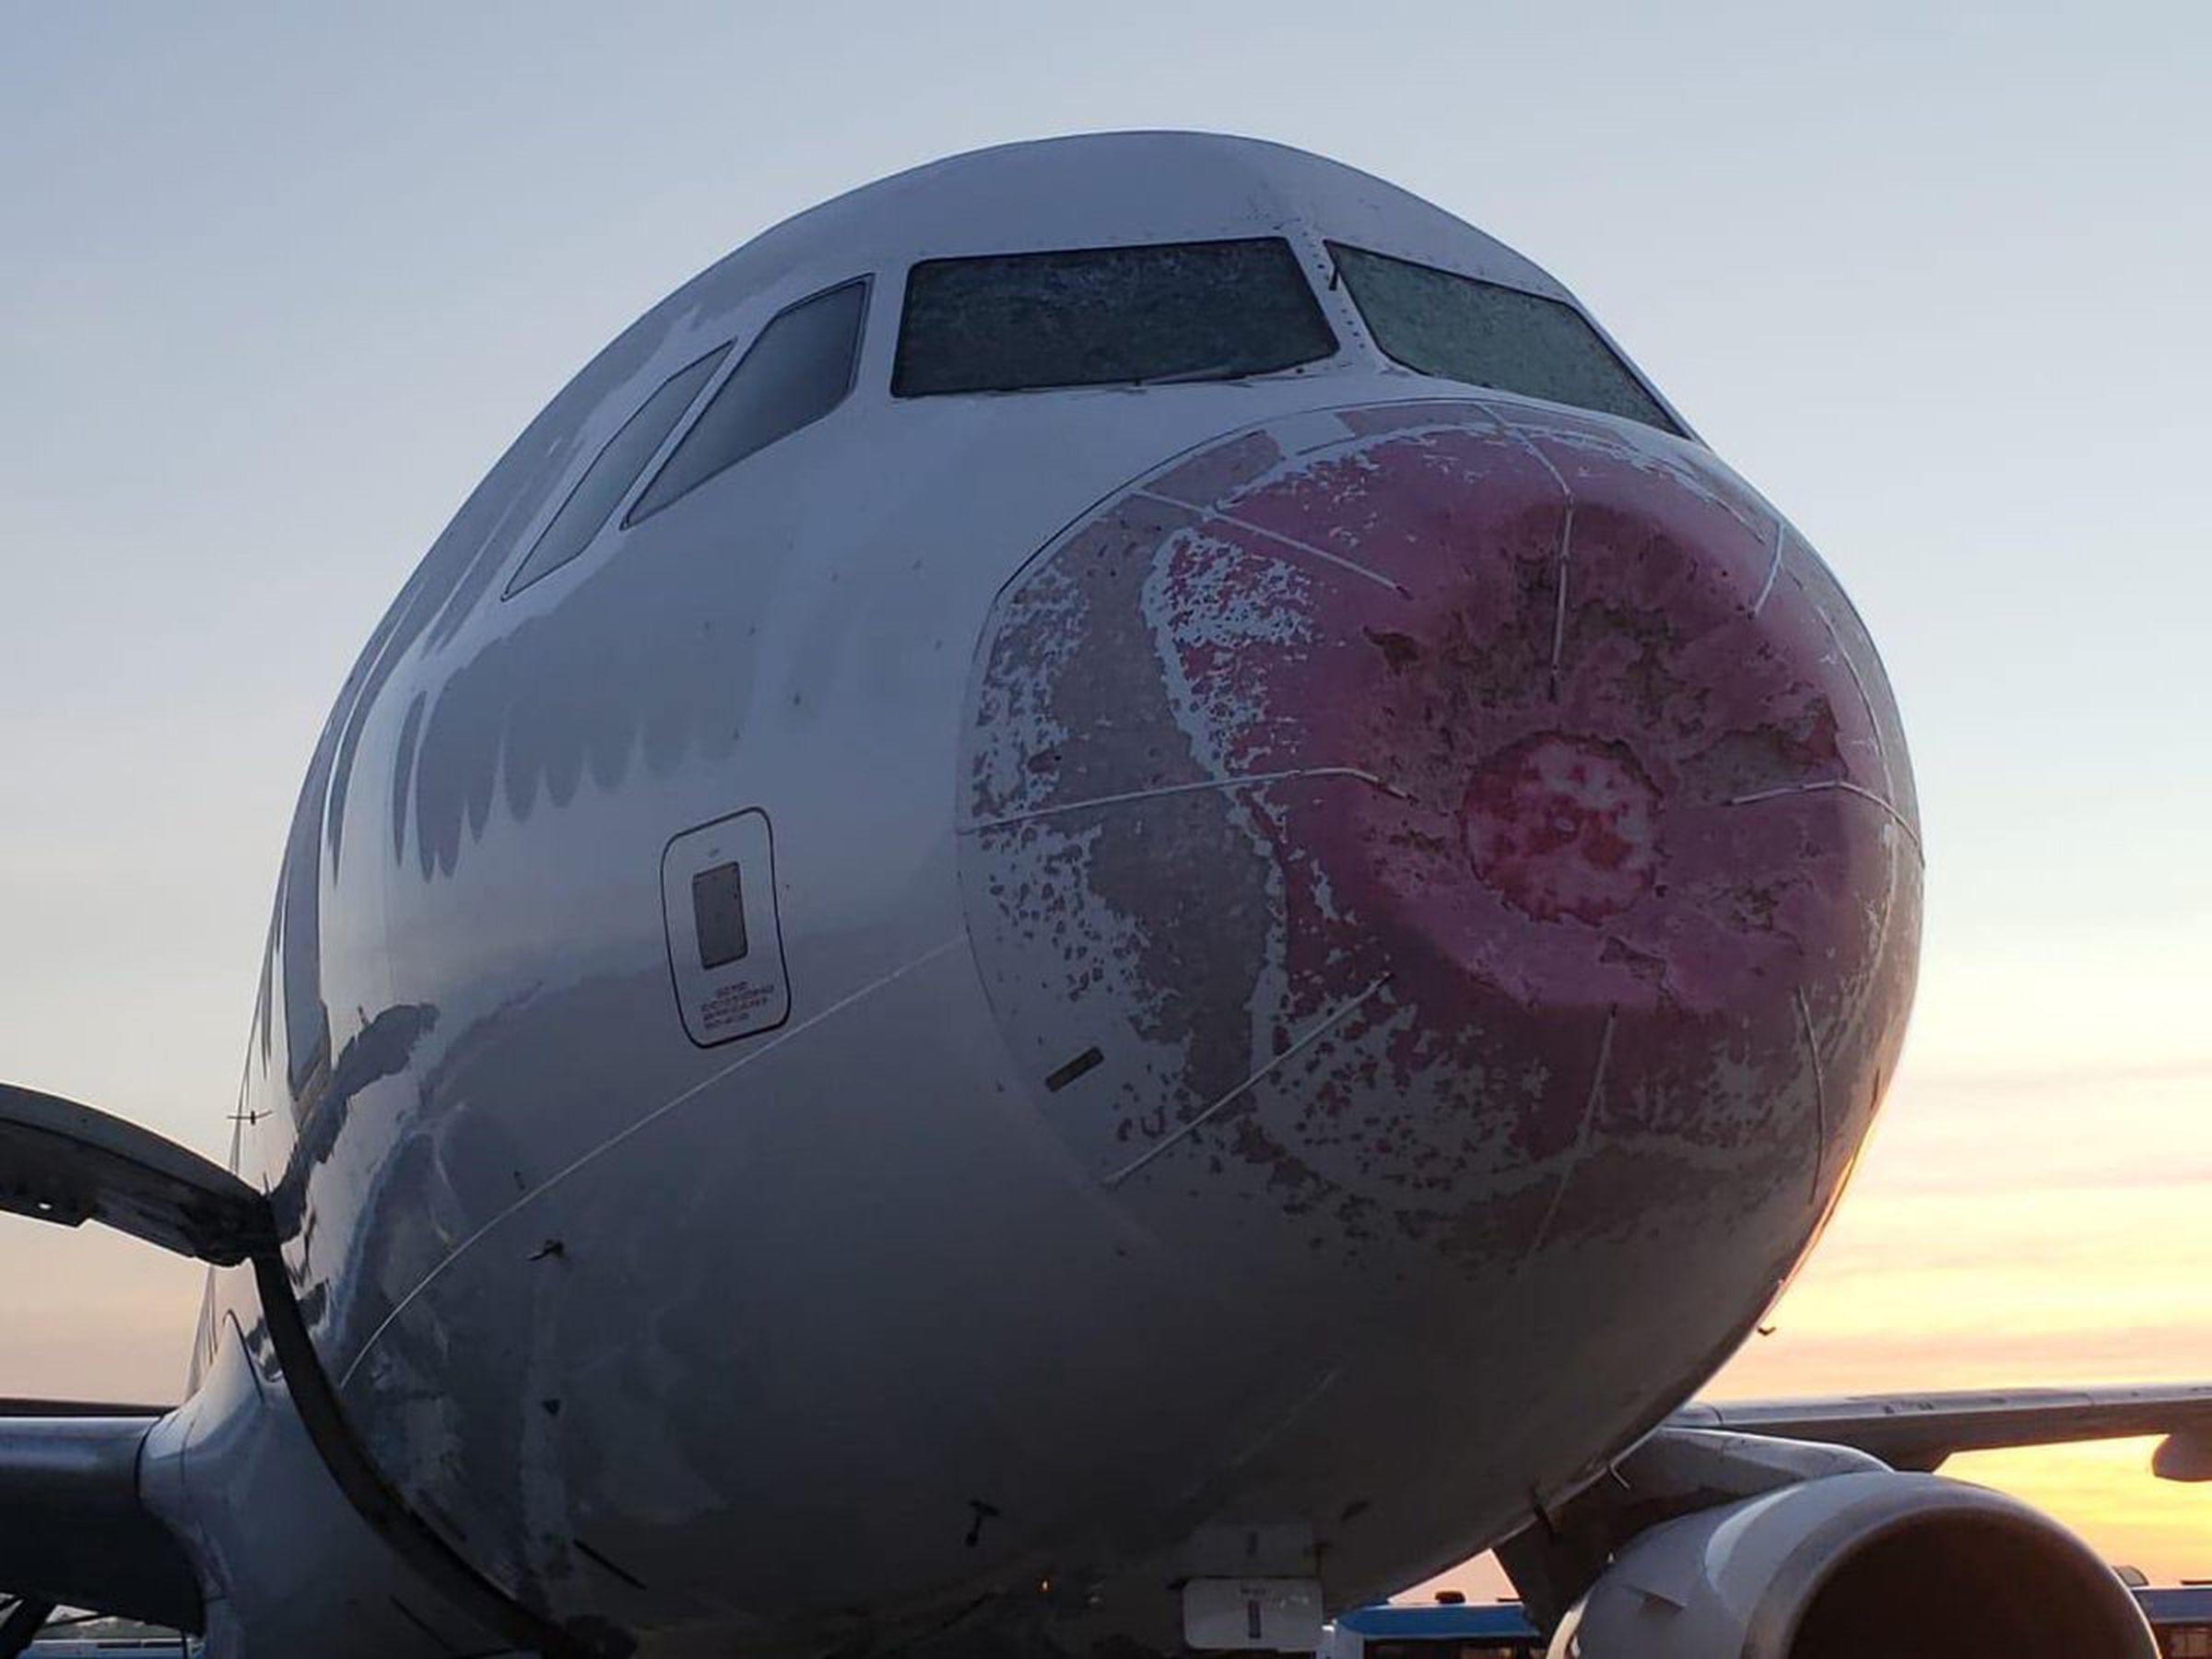 Flight JJ-8050 experienced turbulence and hail that caused both windshields to crack and a damaged nose cone.